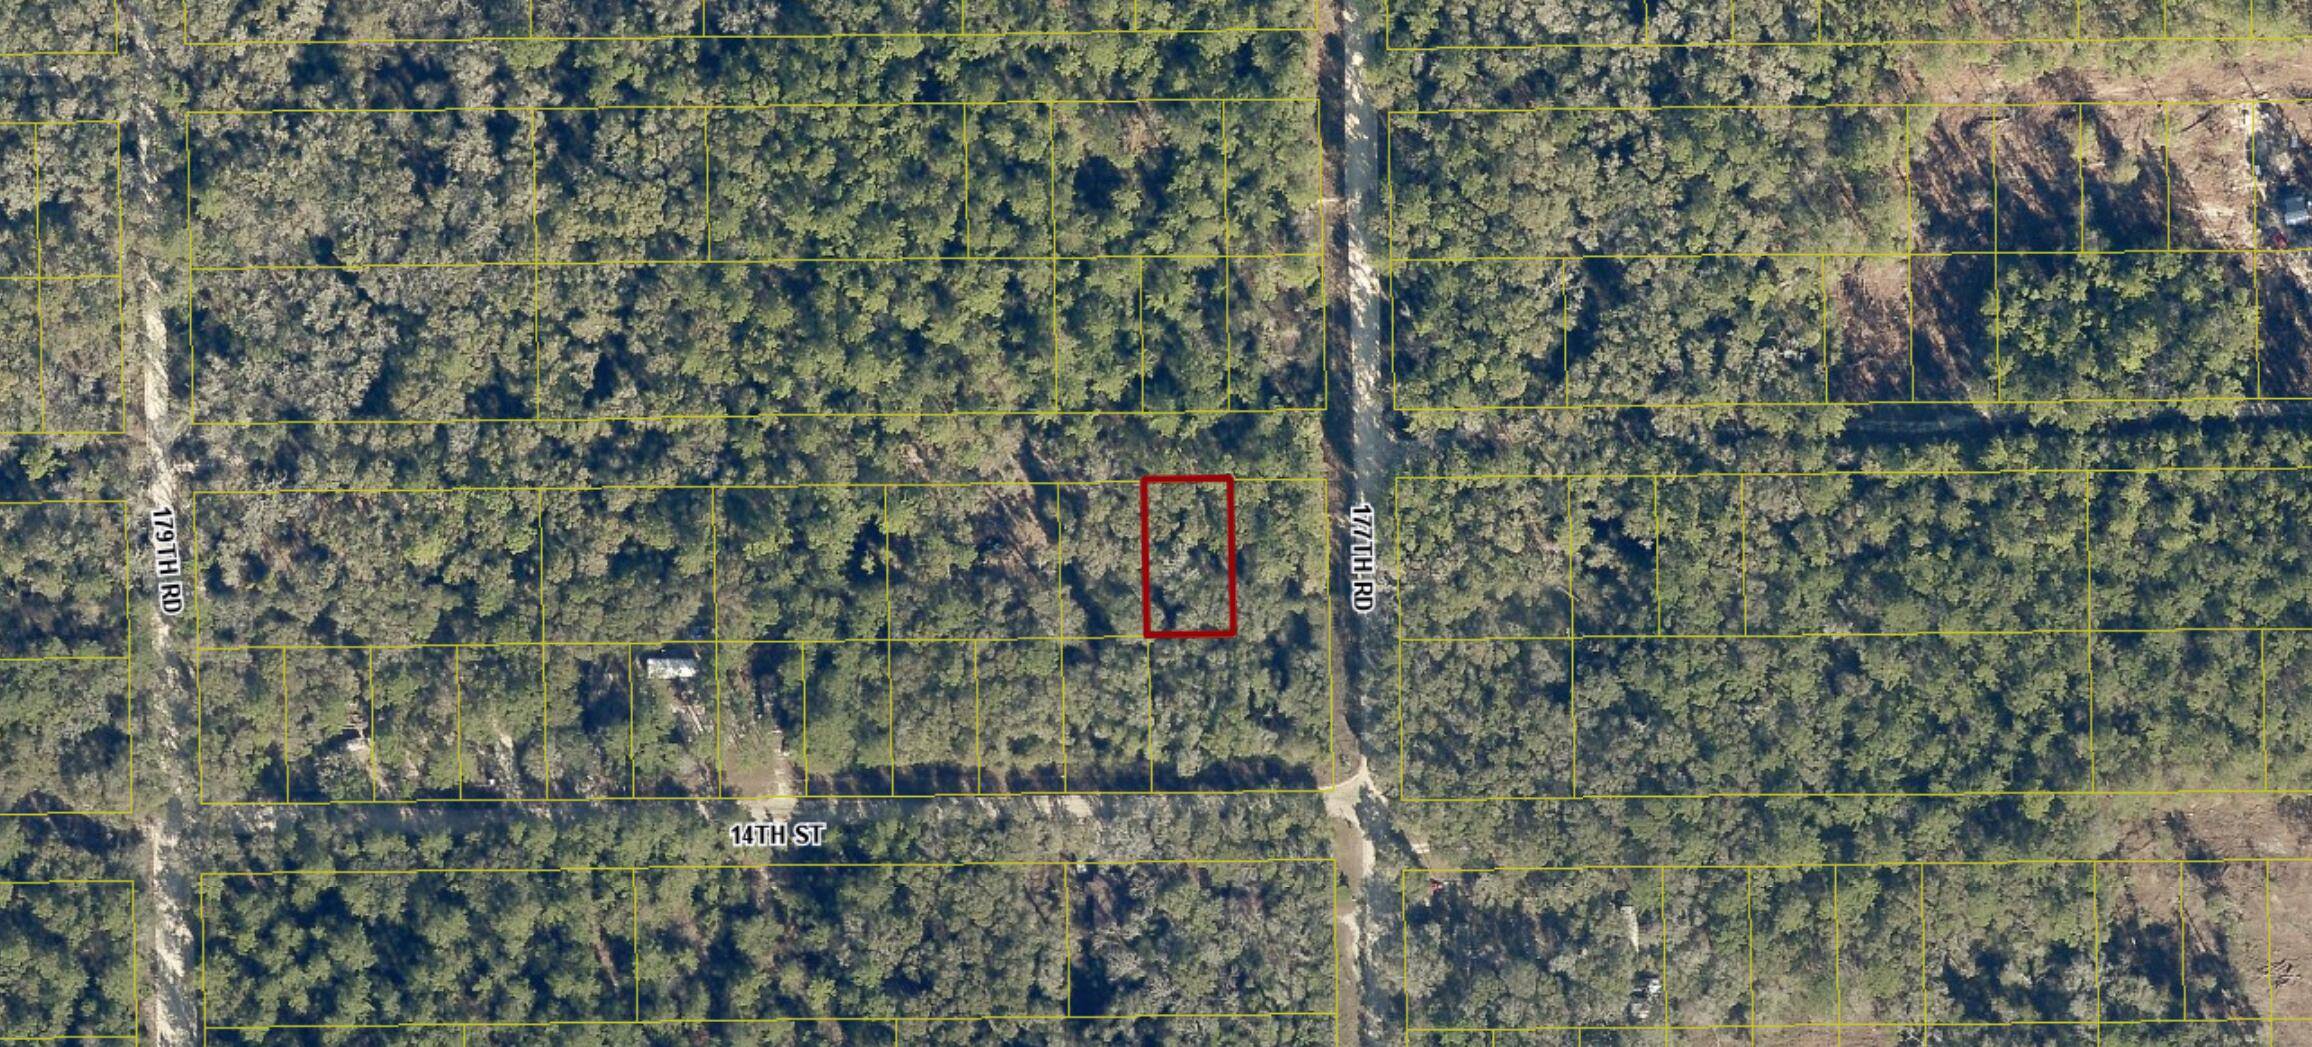 Opportunity to purchase agricultural land in Suwannee County.